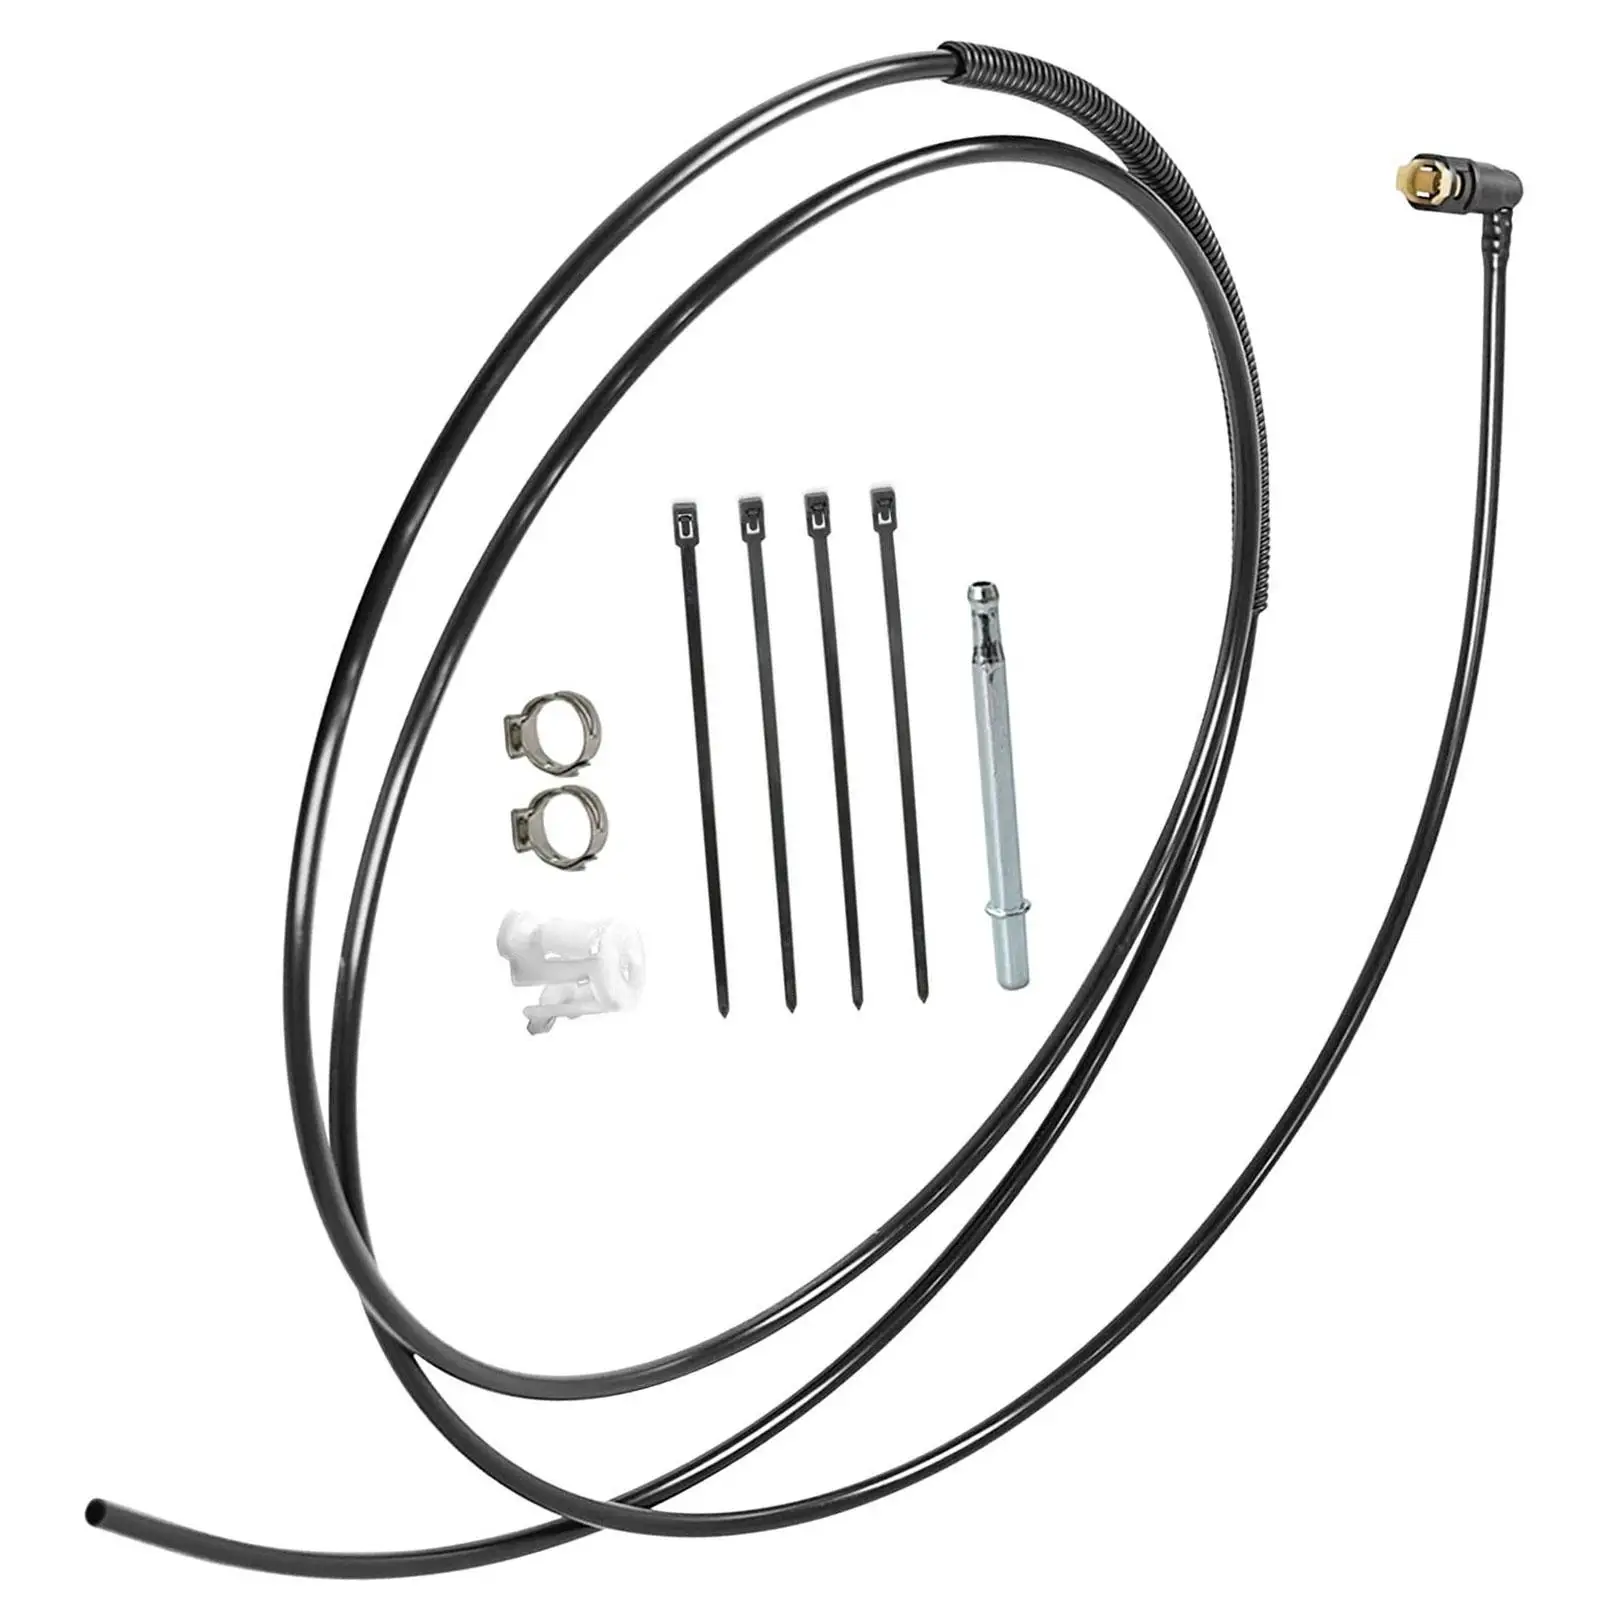 Pick up Gas Fuel Line Fl-Fg0212 Replaces Durable High Performance Car